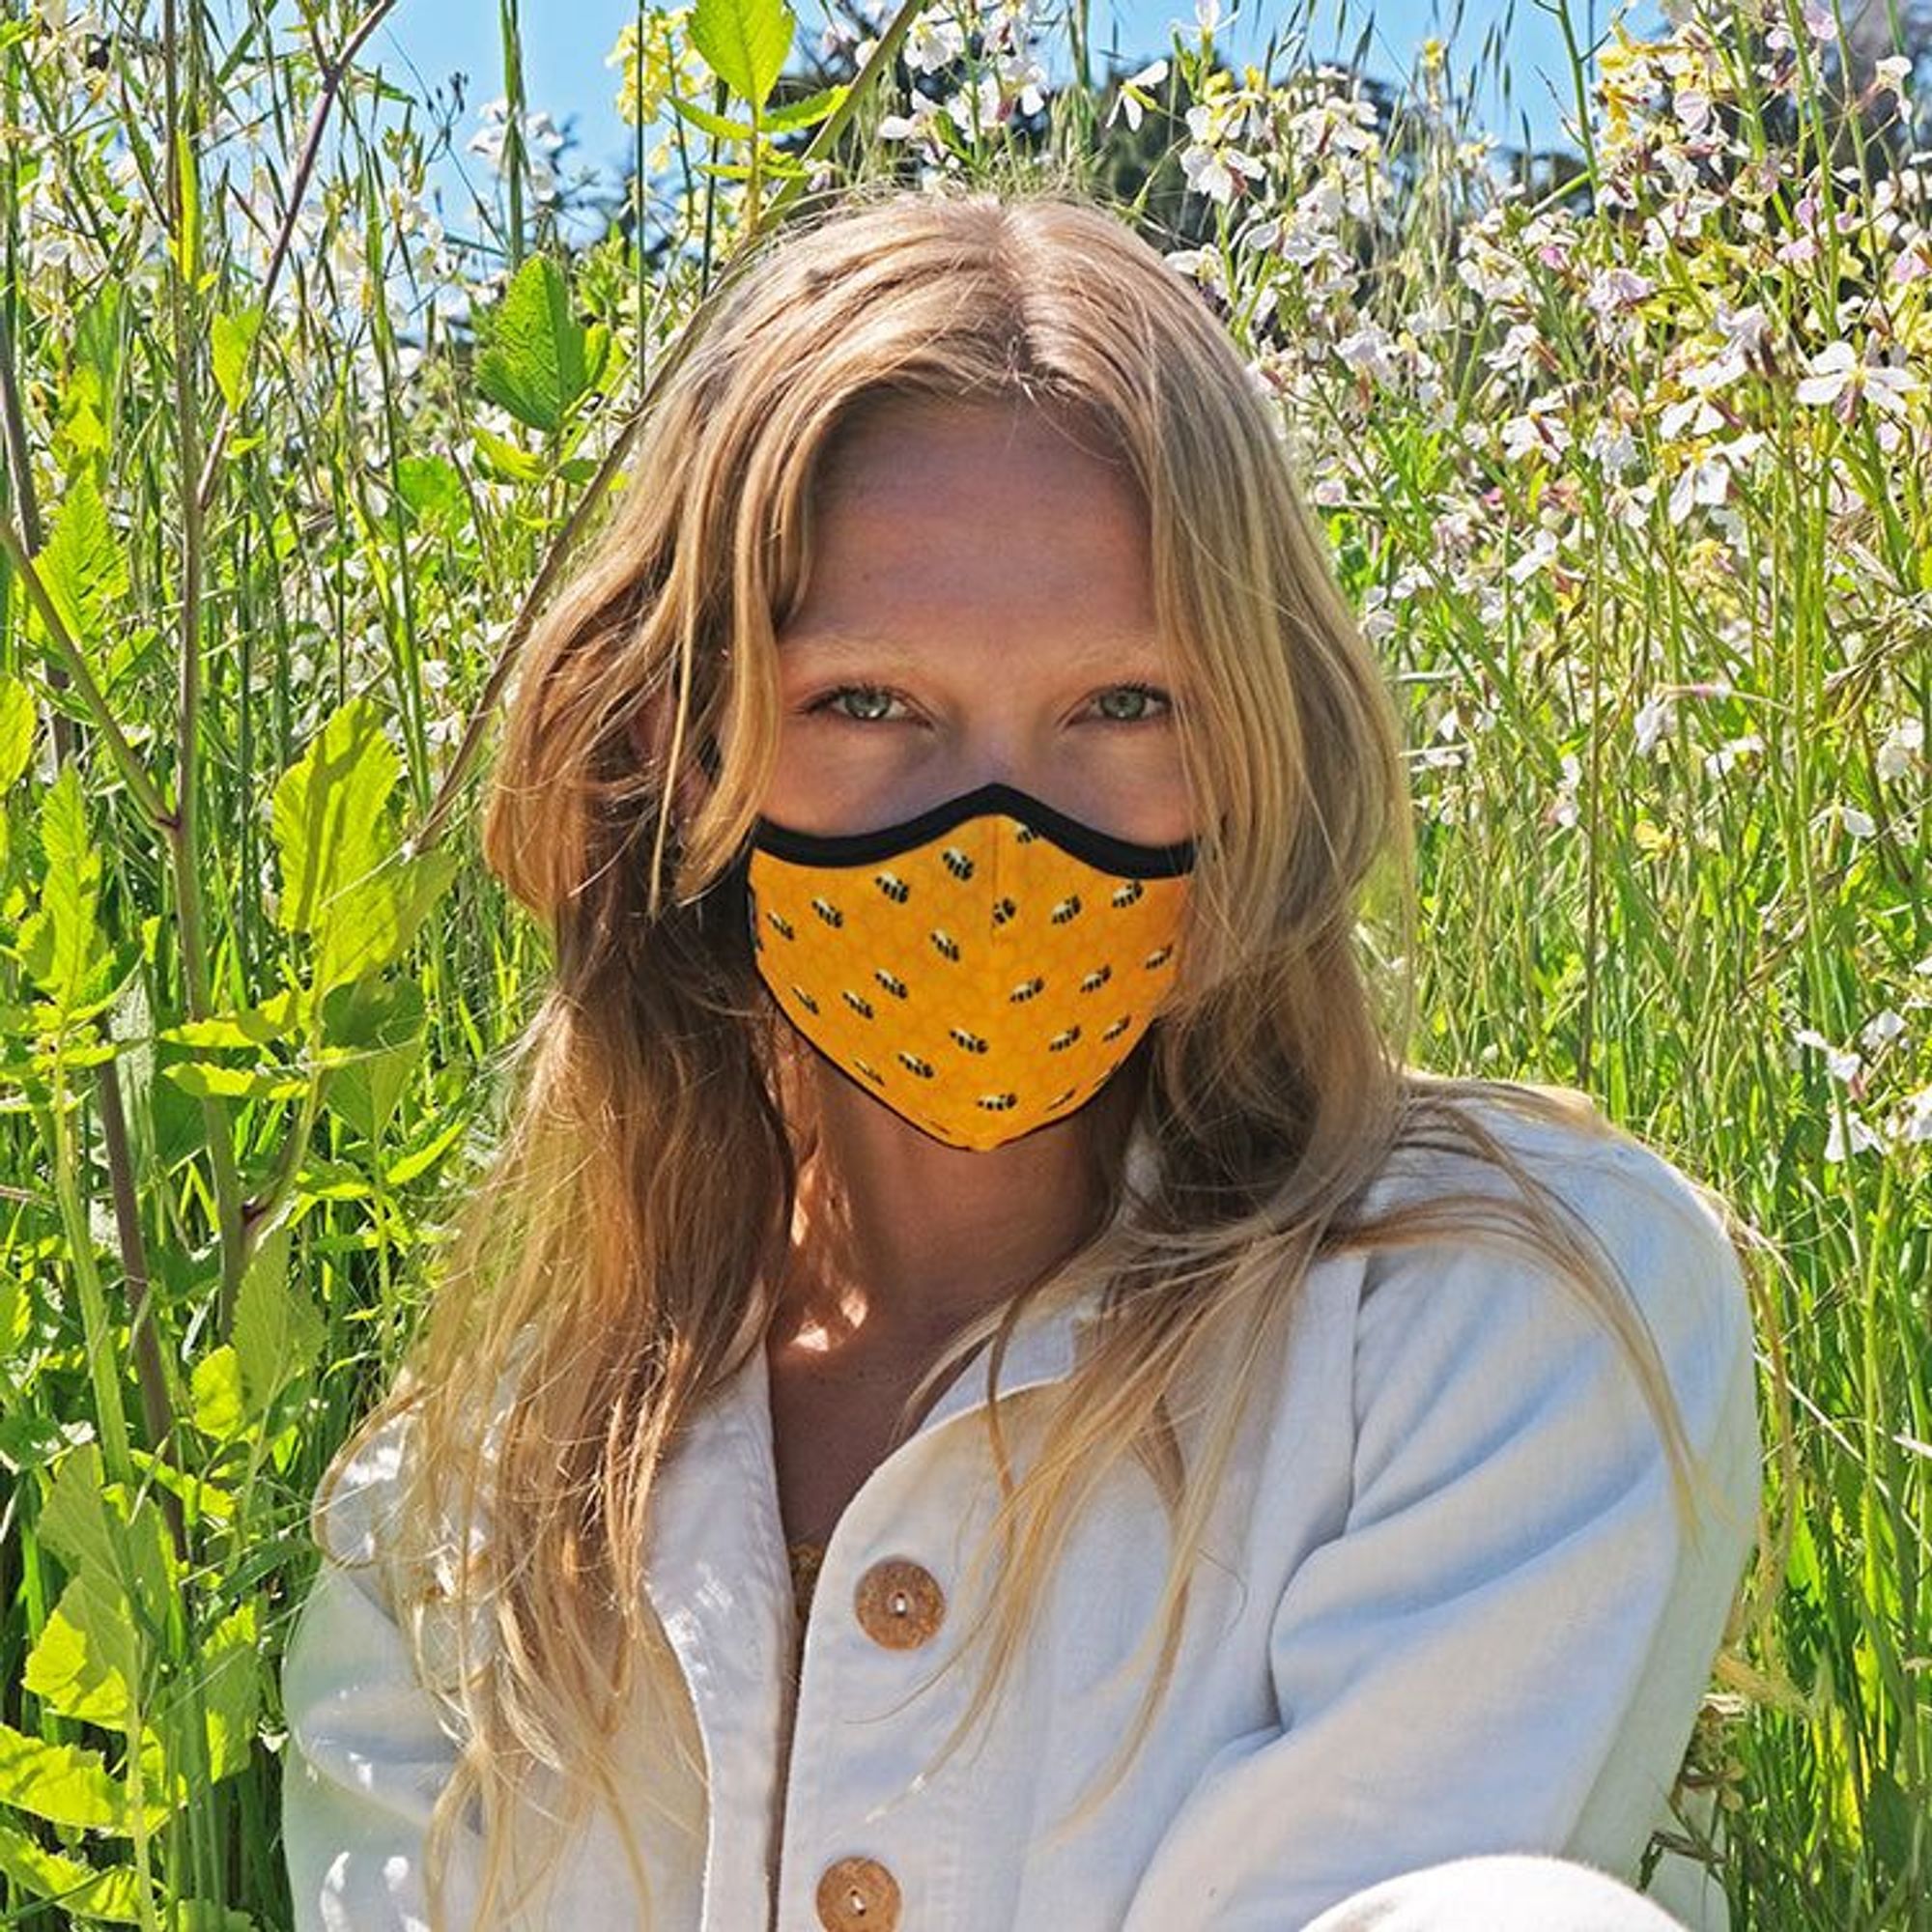 Does Wearing a Mask Help with Allergies? background